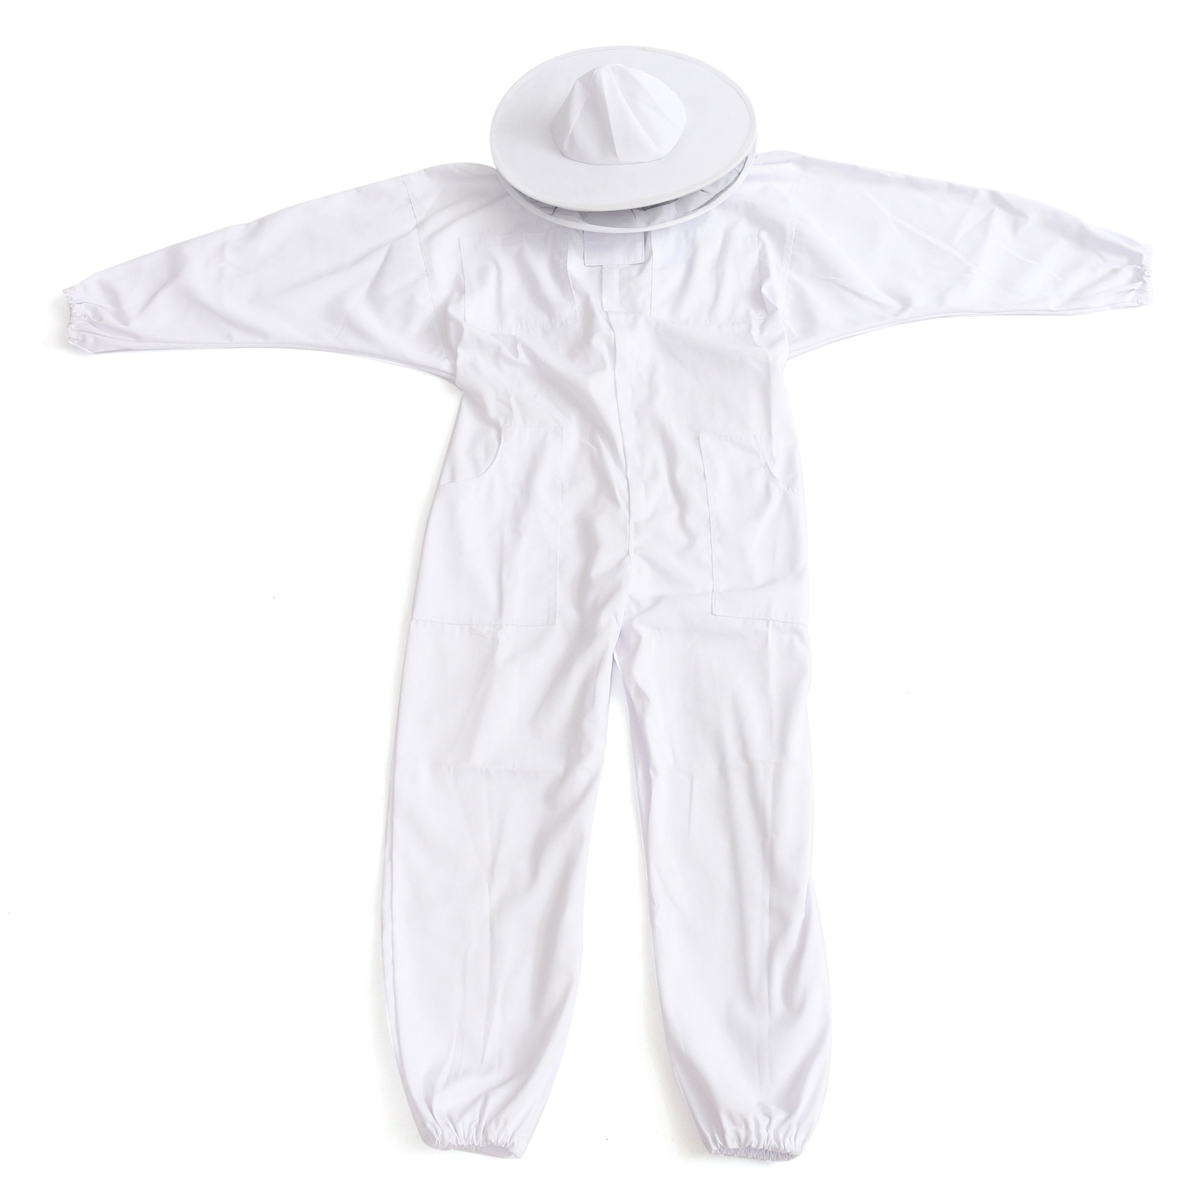 Beekeepers-Bee-Keeping-Cotton-Full-Protector-Suit-With-Veil-Hat-Hood-Bee-Suit-XL-XXL-XXL-1277290-7